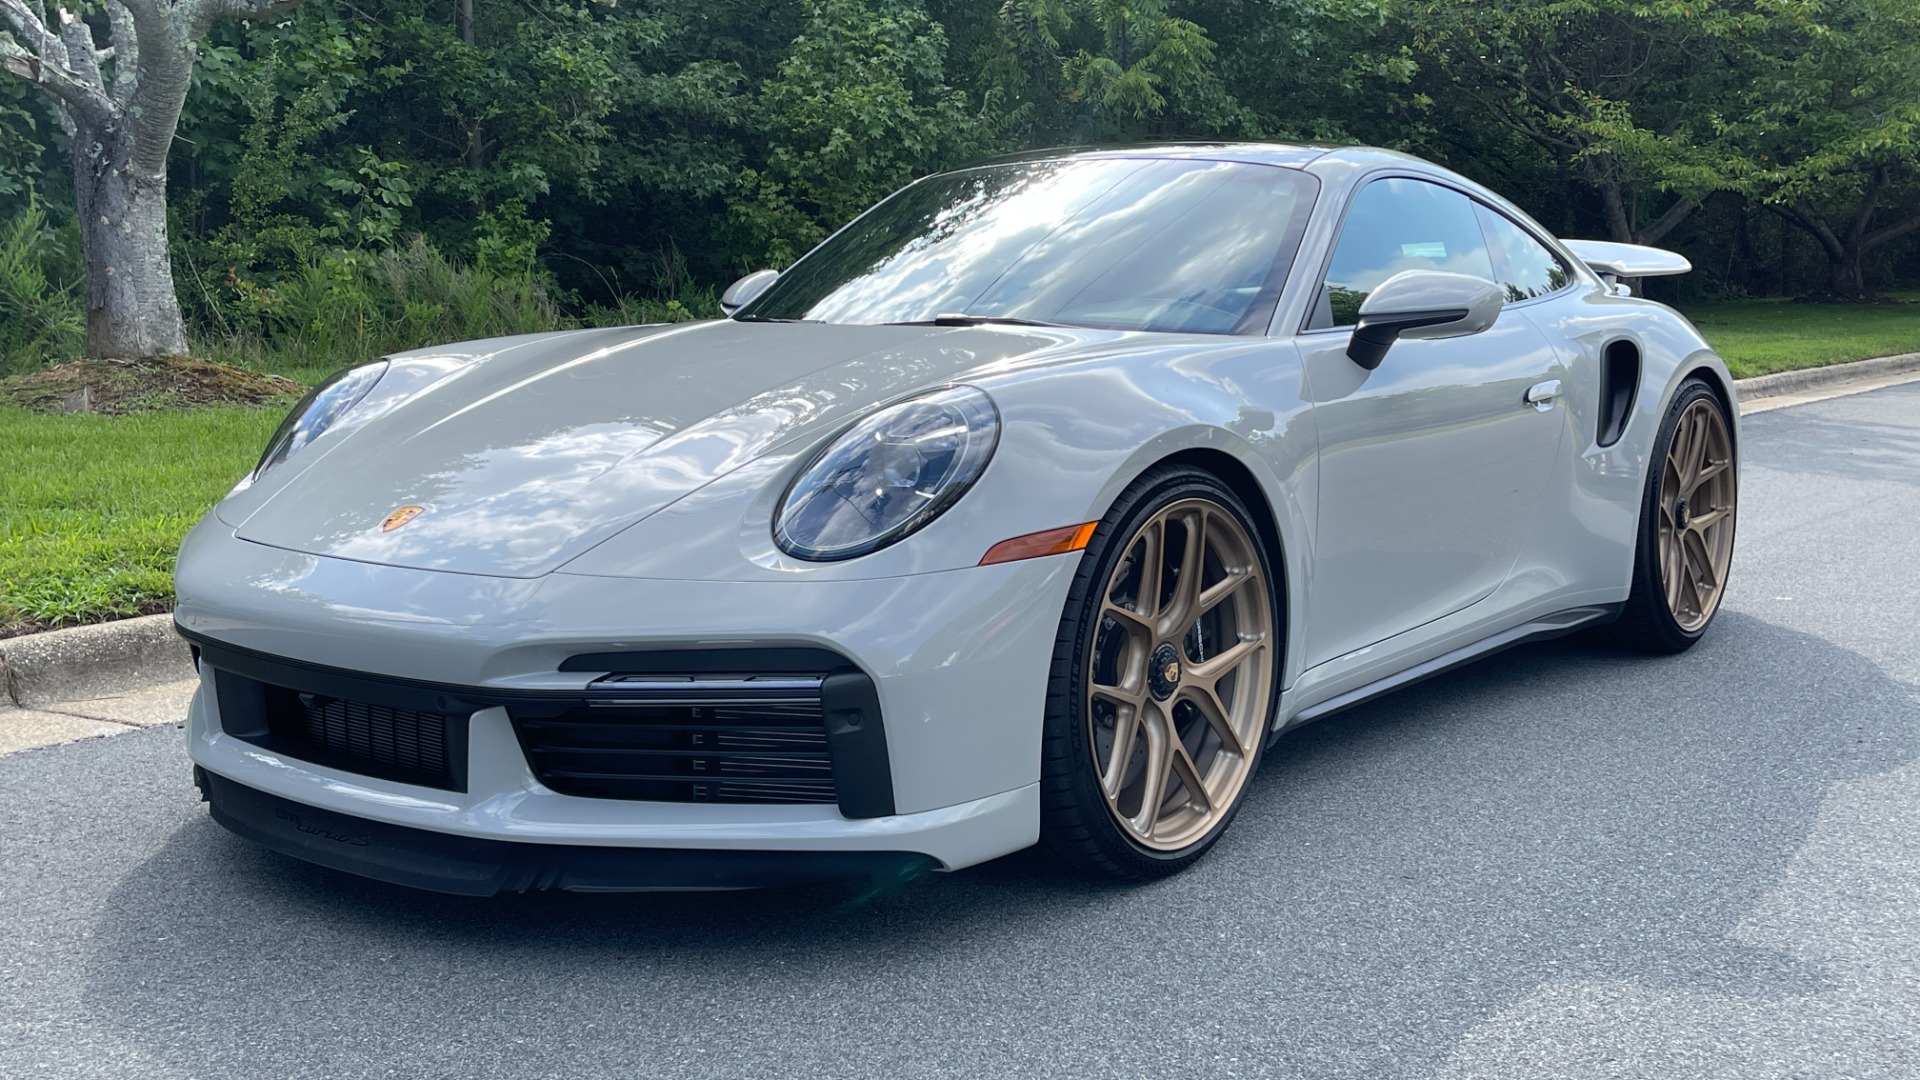 Used 2021 Porsche 911 Turbo S / HRE WHEELS / FRONT LIFT / MATRIX LIGHTS / PASM SUSPENSION for sale Sold at Formula Imports in Charlotte NC 28227 3